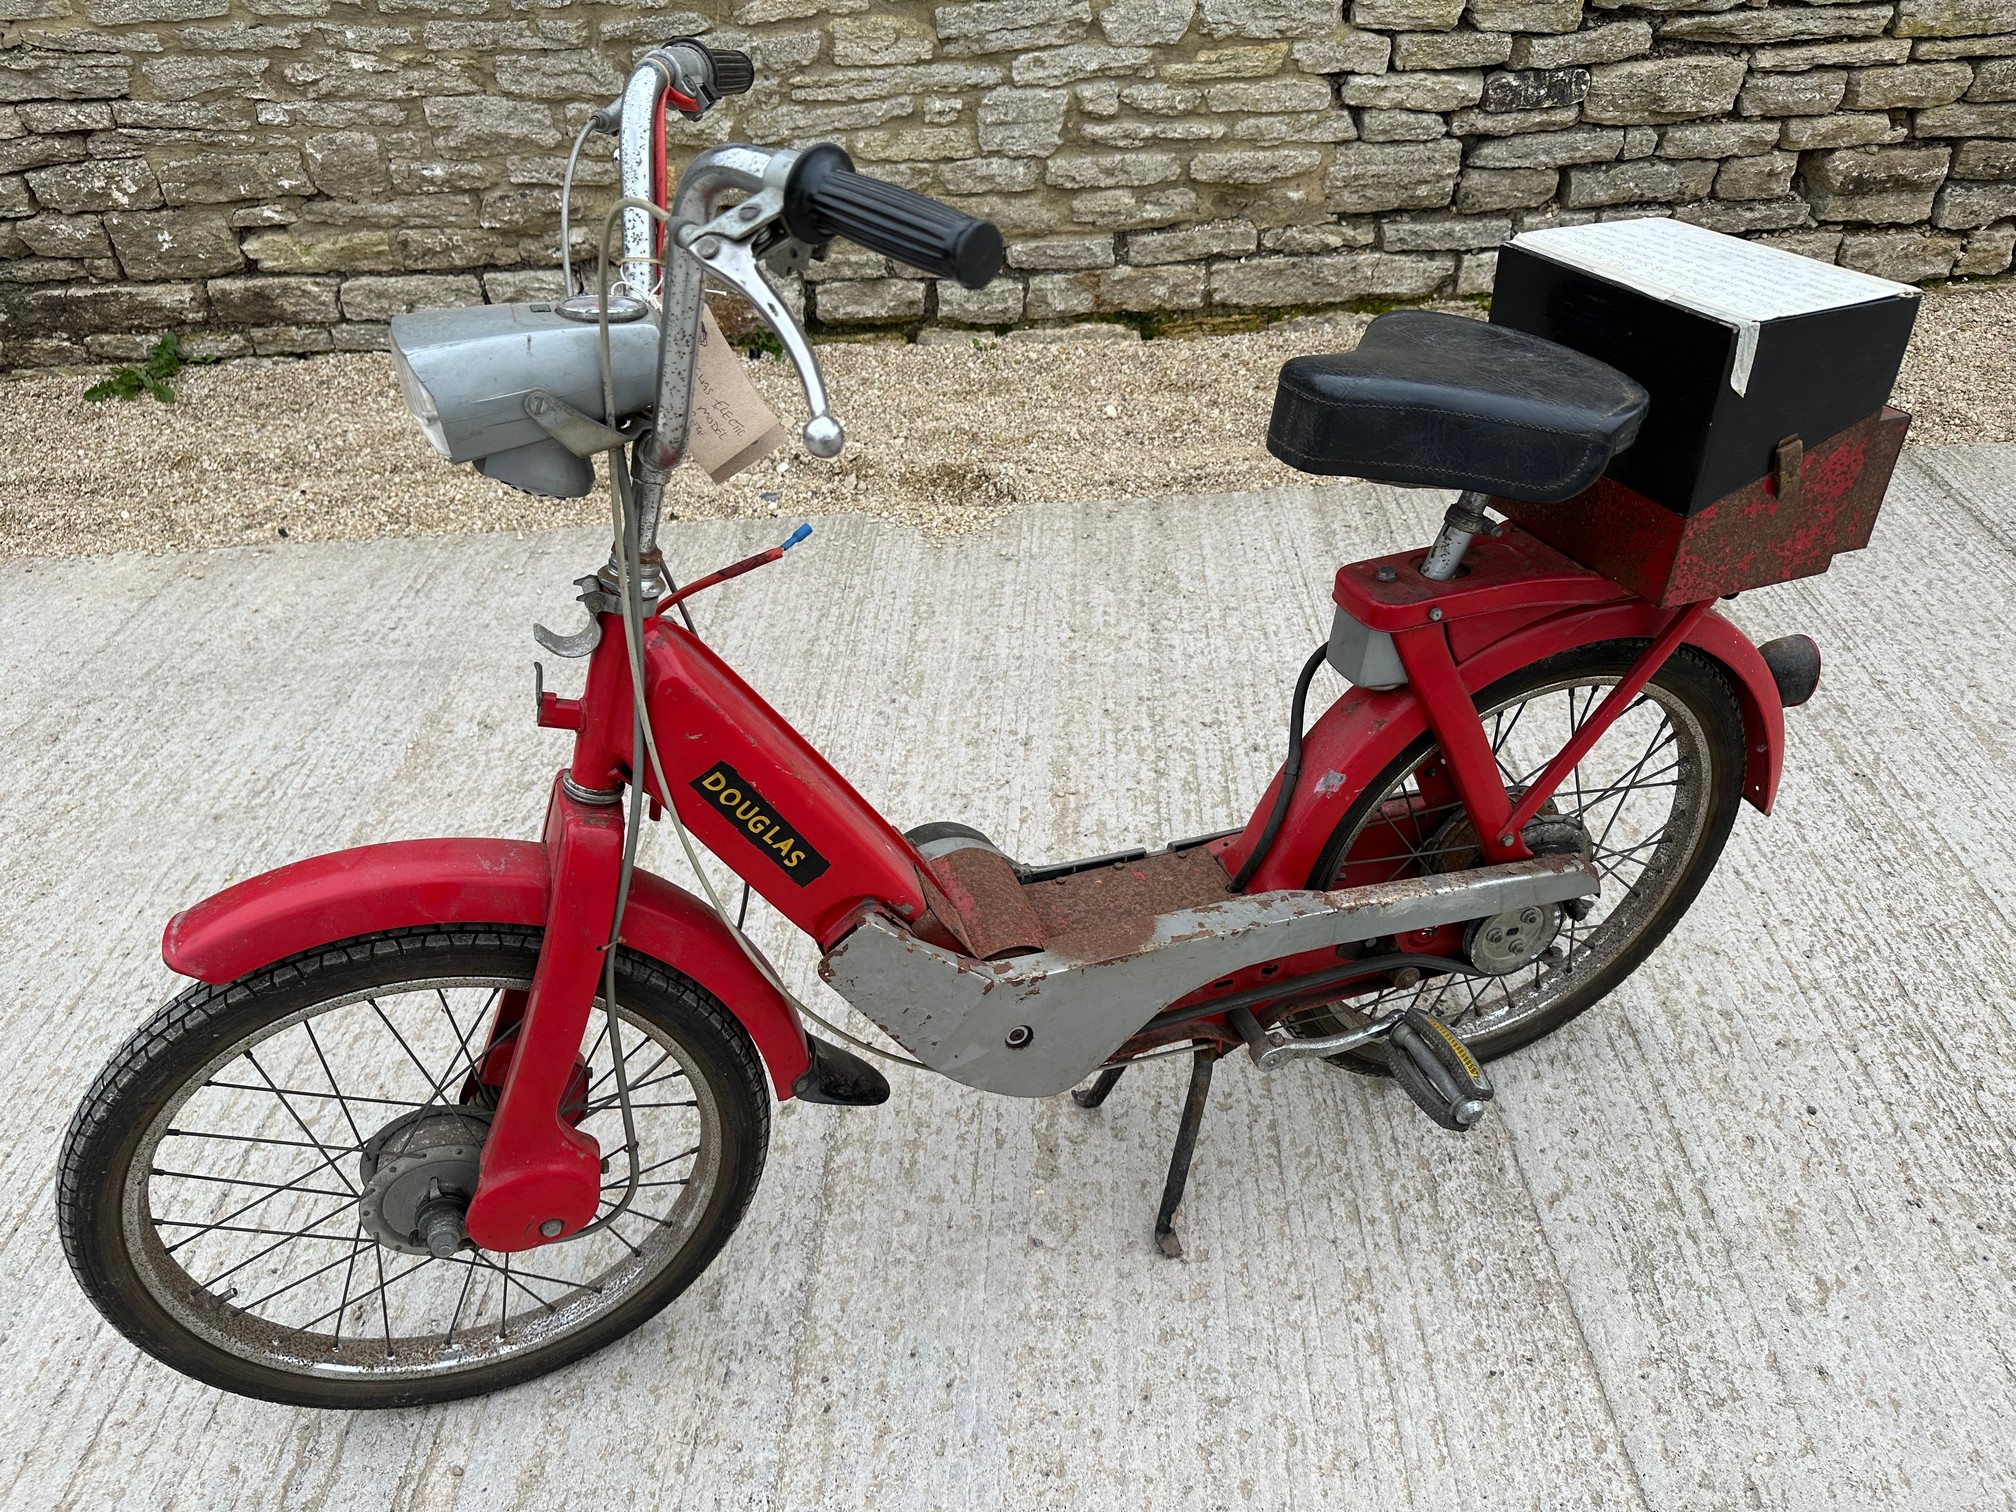 1980 DOUGLAS ELECTRIC MOPED - Image 2 of 5